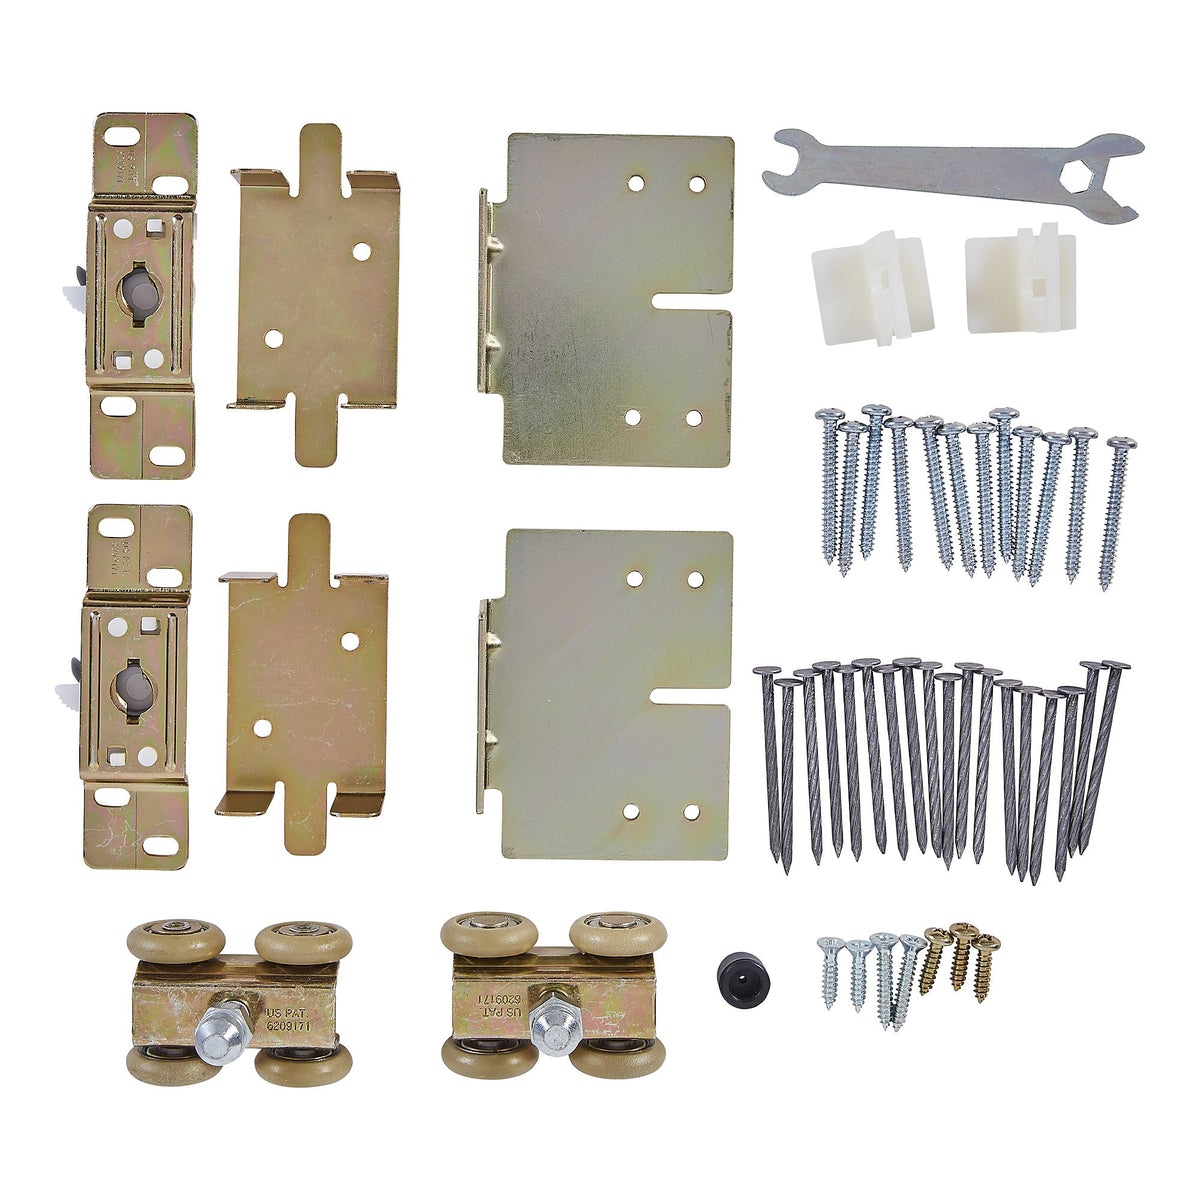 Pocket Door Replacement Kit - Outdoor Use - Zinc Finish - Sold as Kit